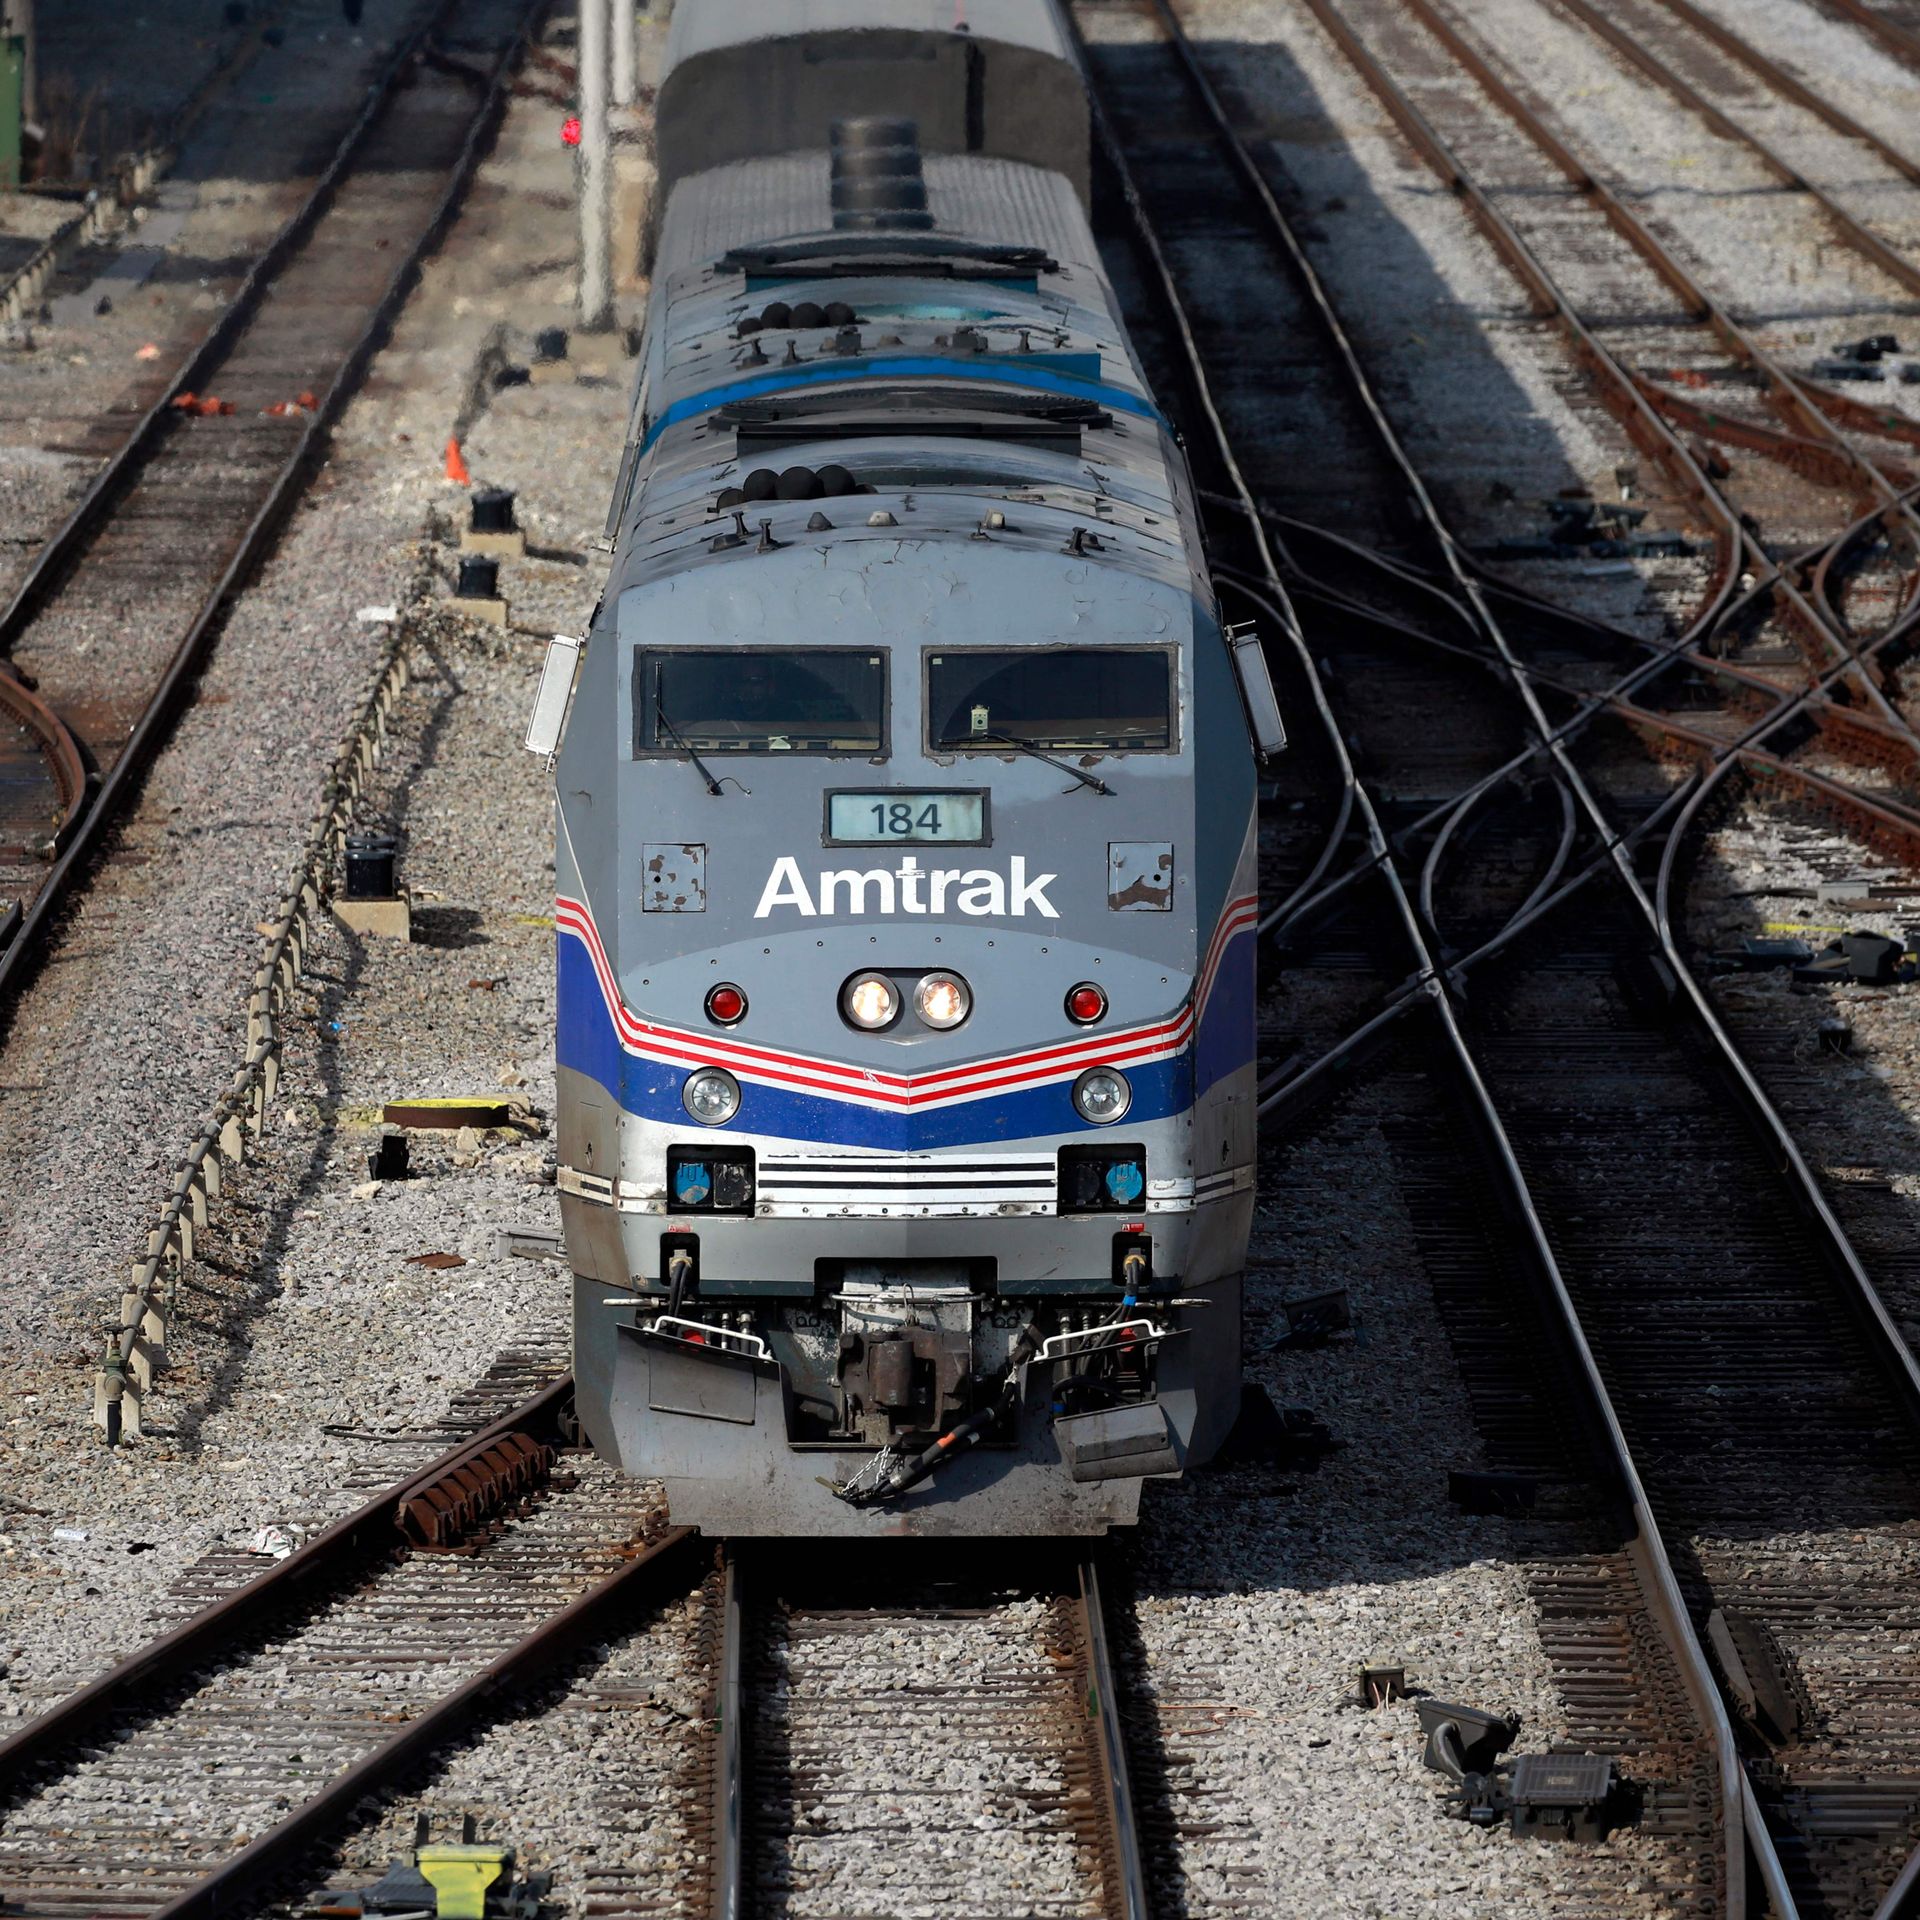 An Amtrak train departing a station. 